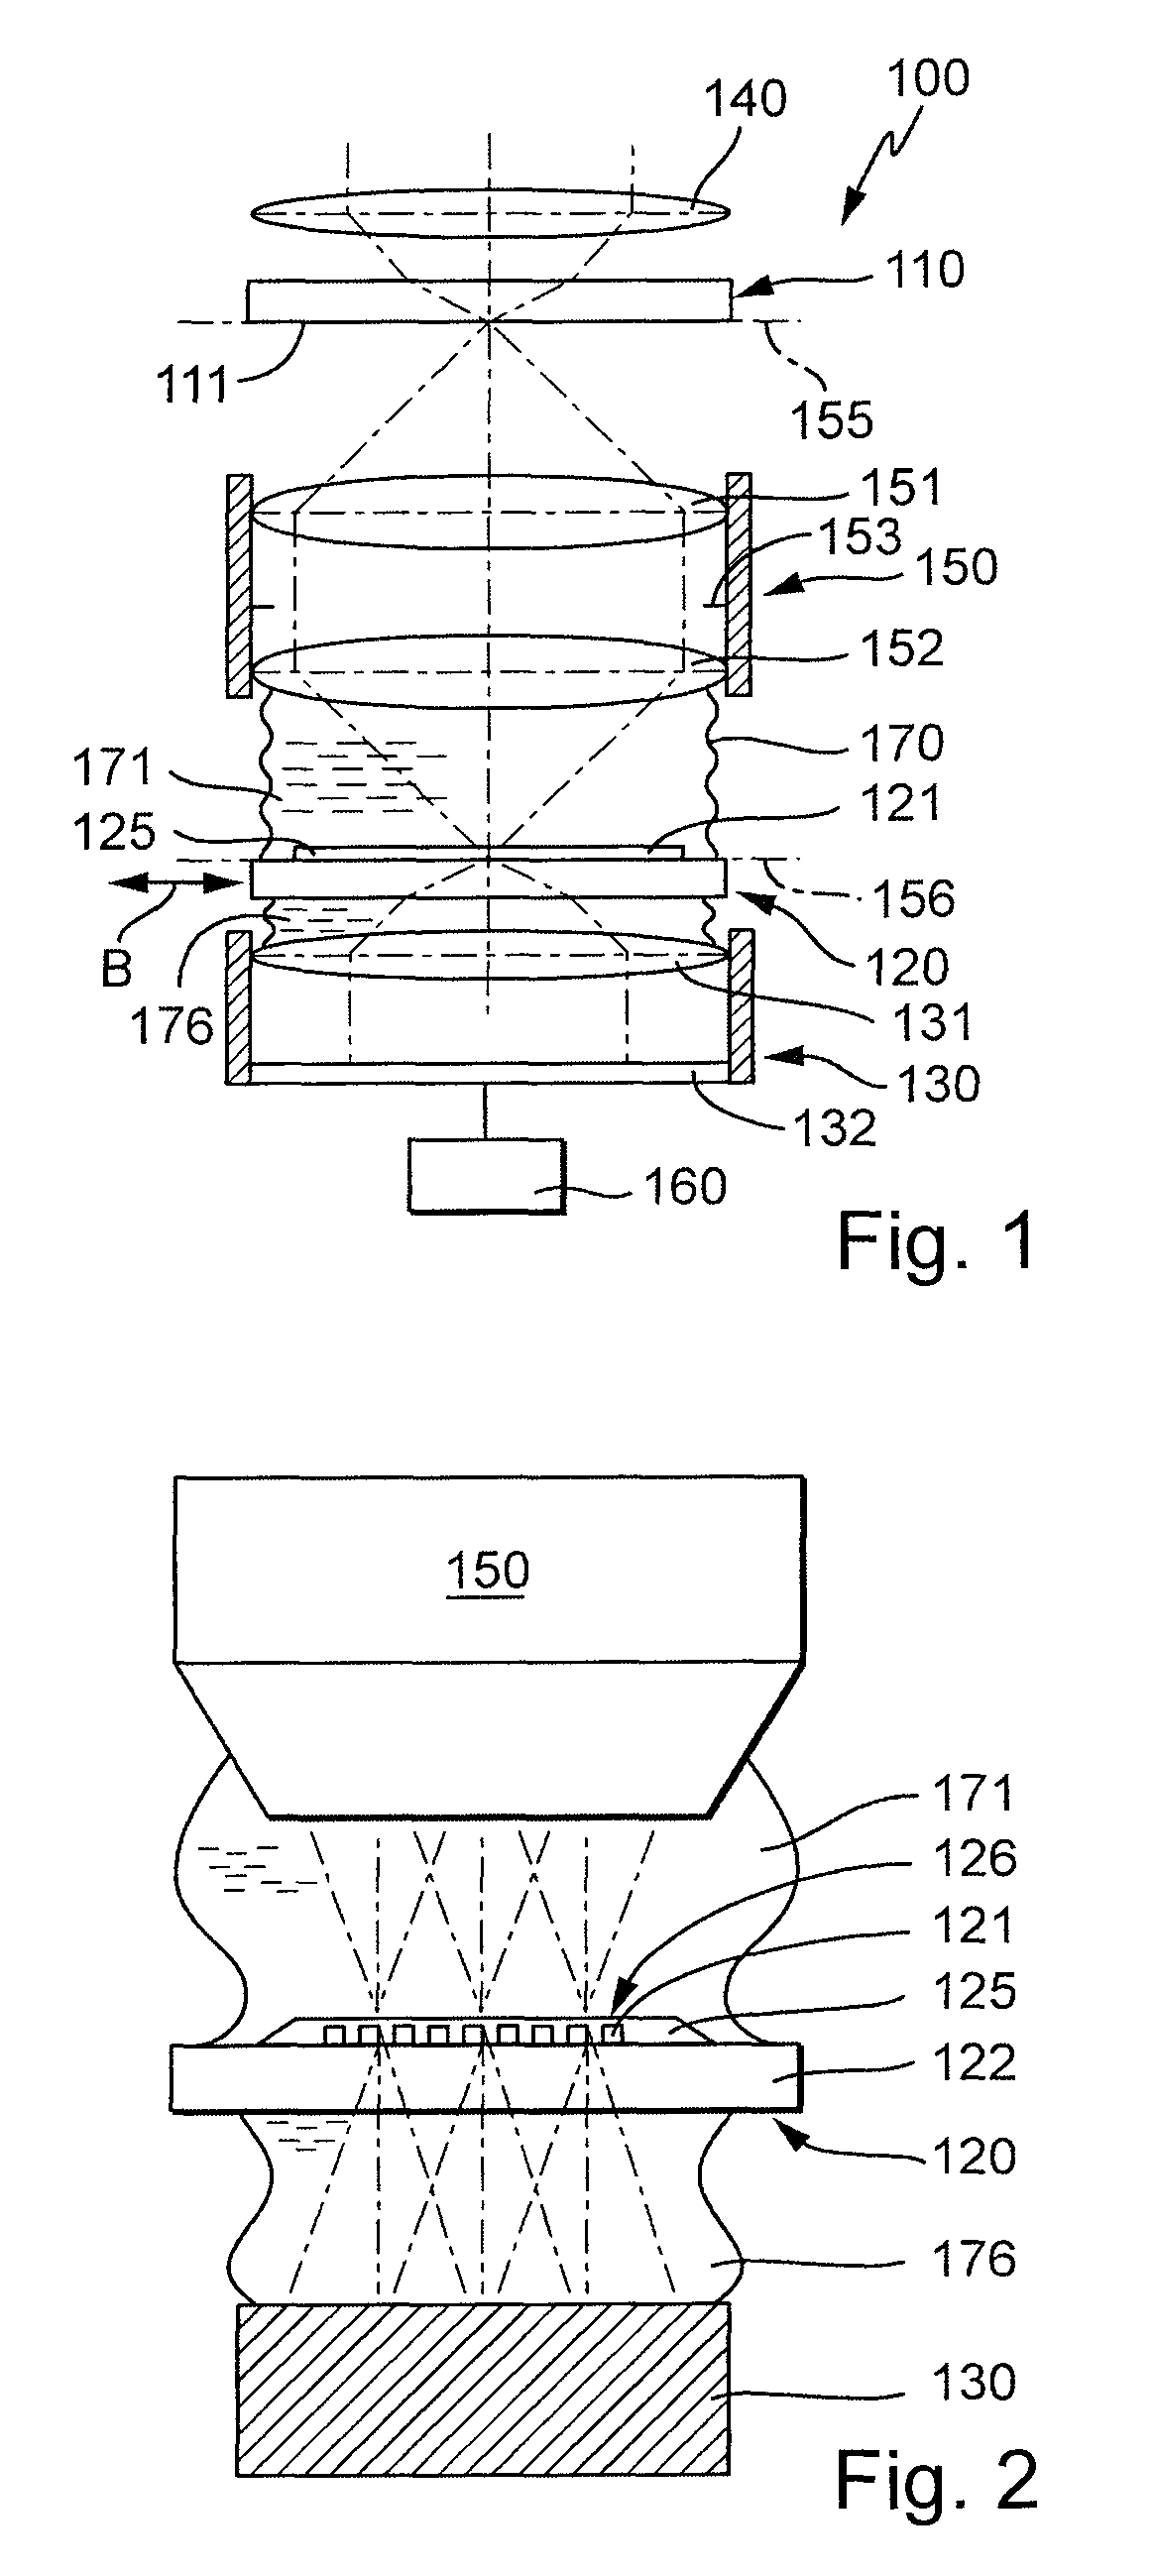 System for measuring the image quality of an optical imaging system